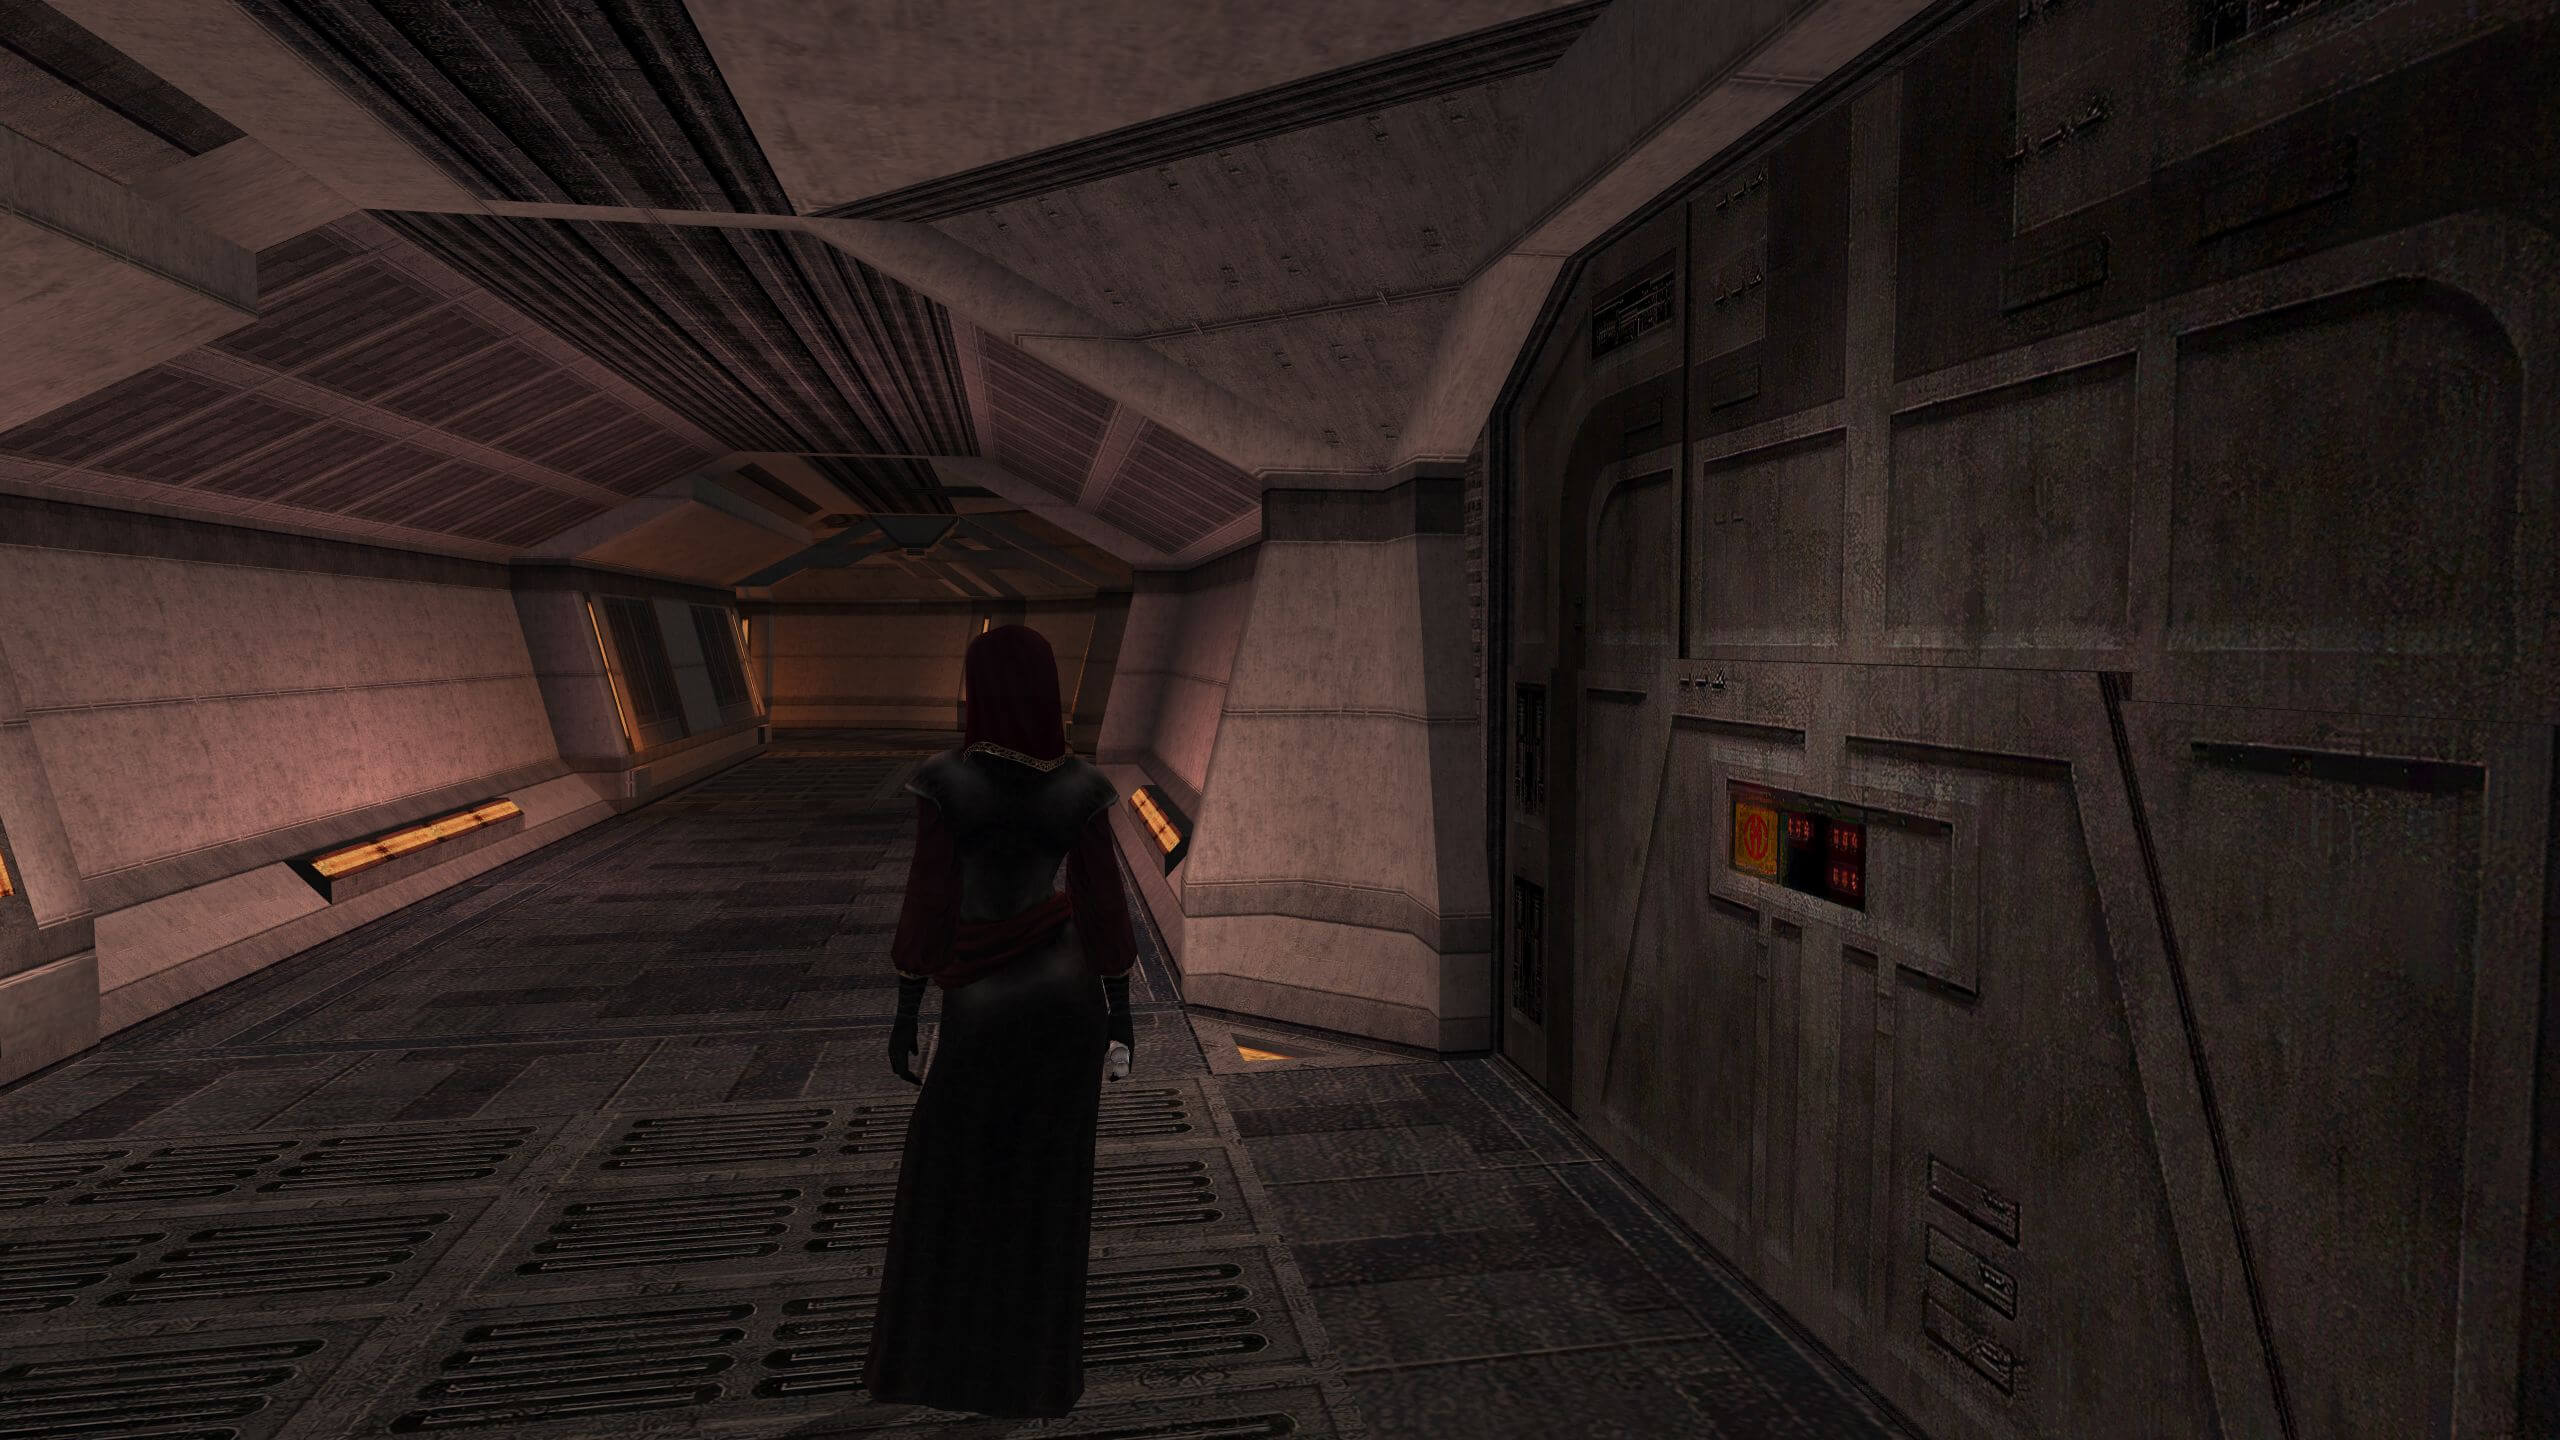 Star wars kotor андроид русификатор. Kotor 2 Mods. Star Wars: Knights of the old Republic II – the Sith Lords. Star Wars : Knights of the old Republic.